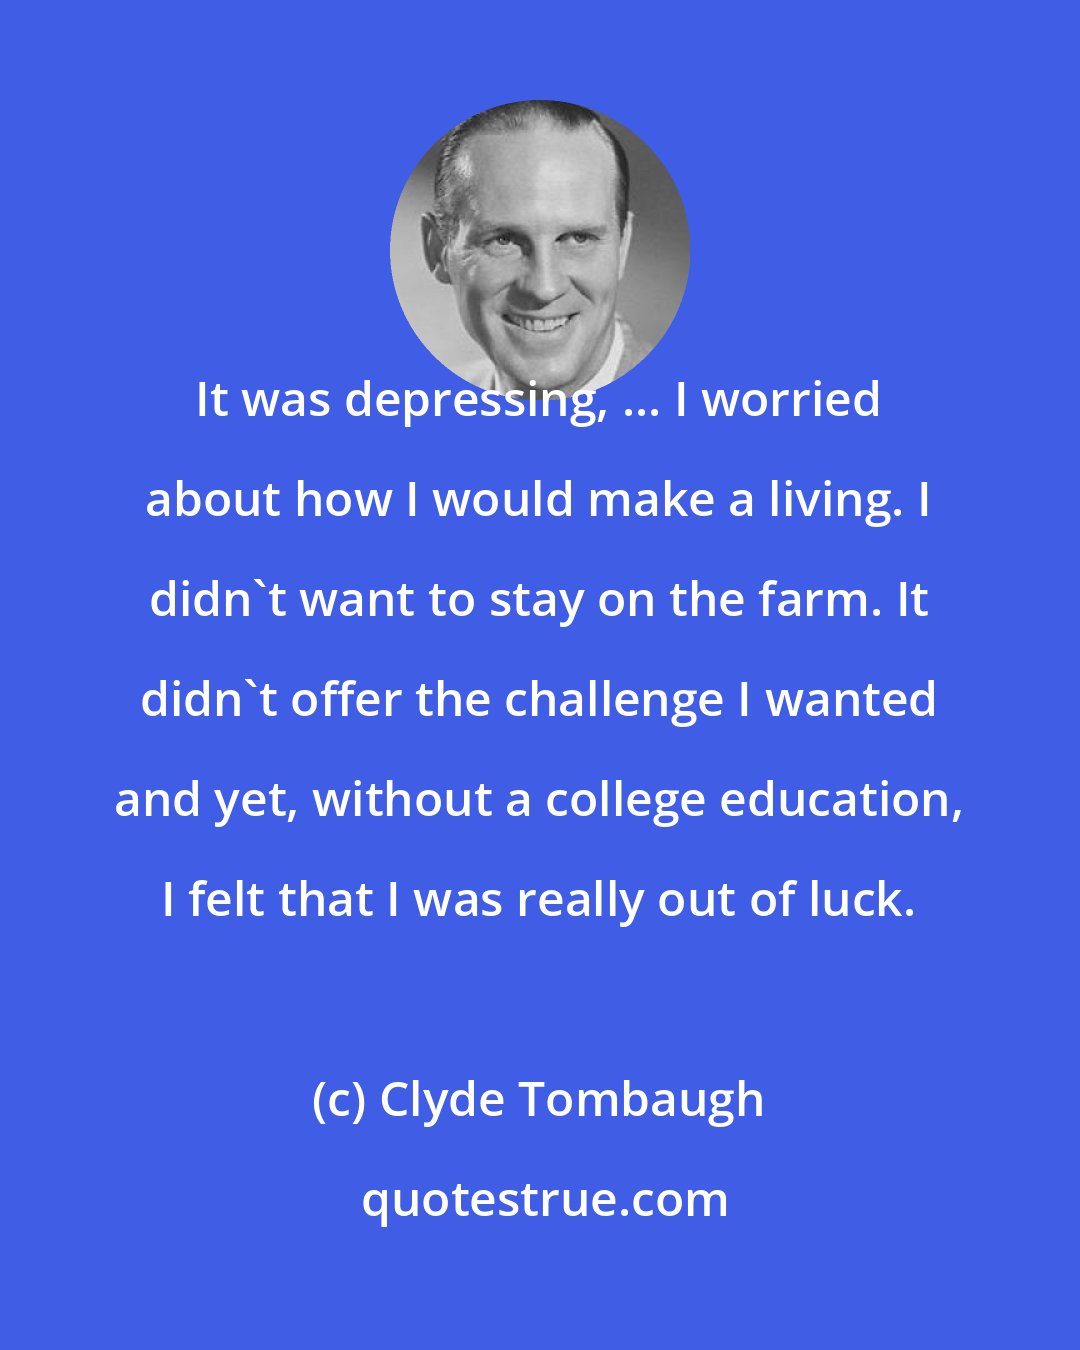 Clyde Tombaugh: It was depressing, ... I worried about how I would make a living. I didn't want to stay on the farm. It didn't offer the challenge I wanted and yet, without a college education, I felt that I was really out of luck.